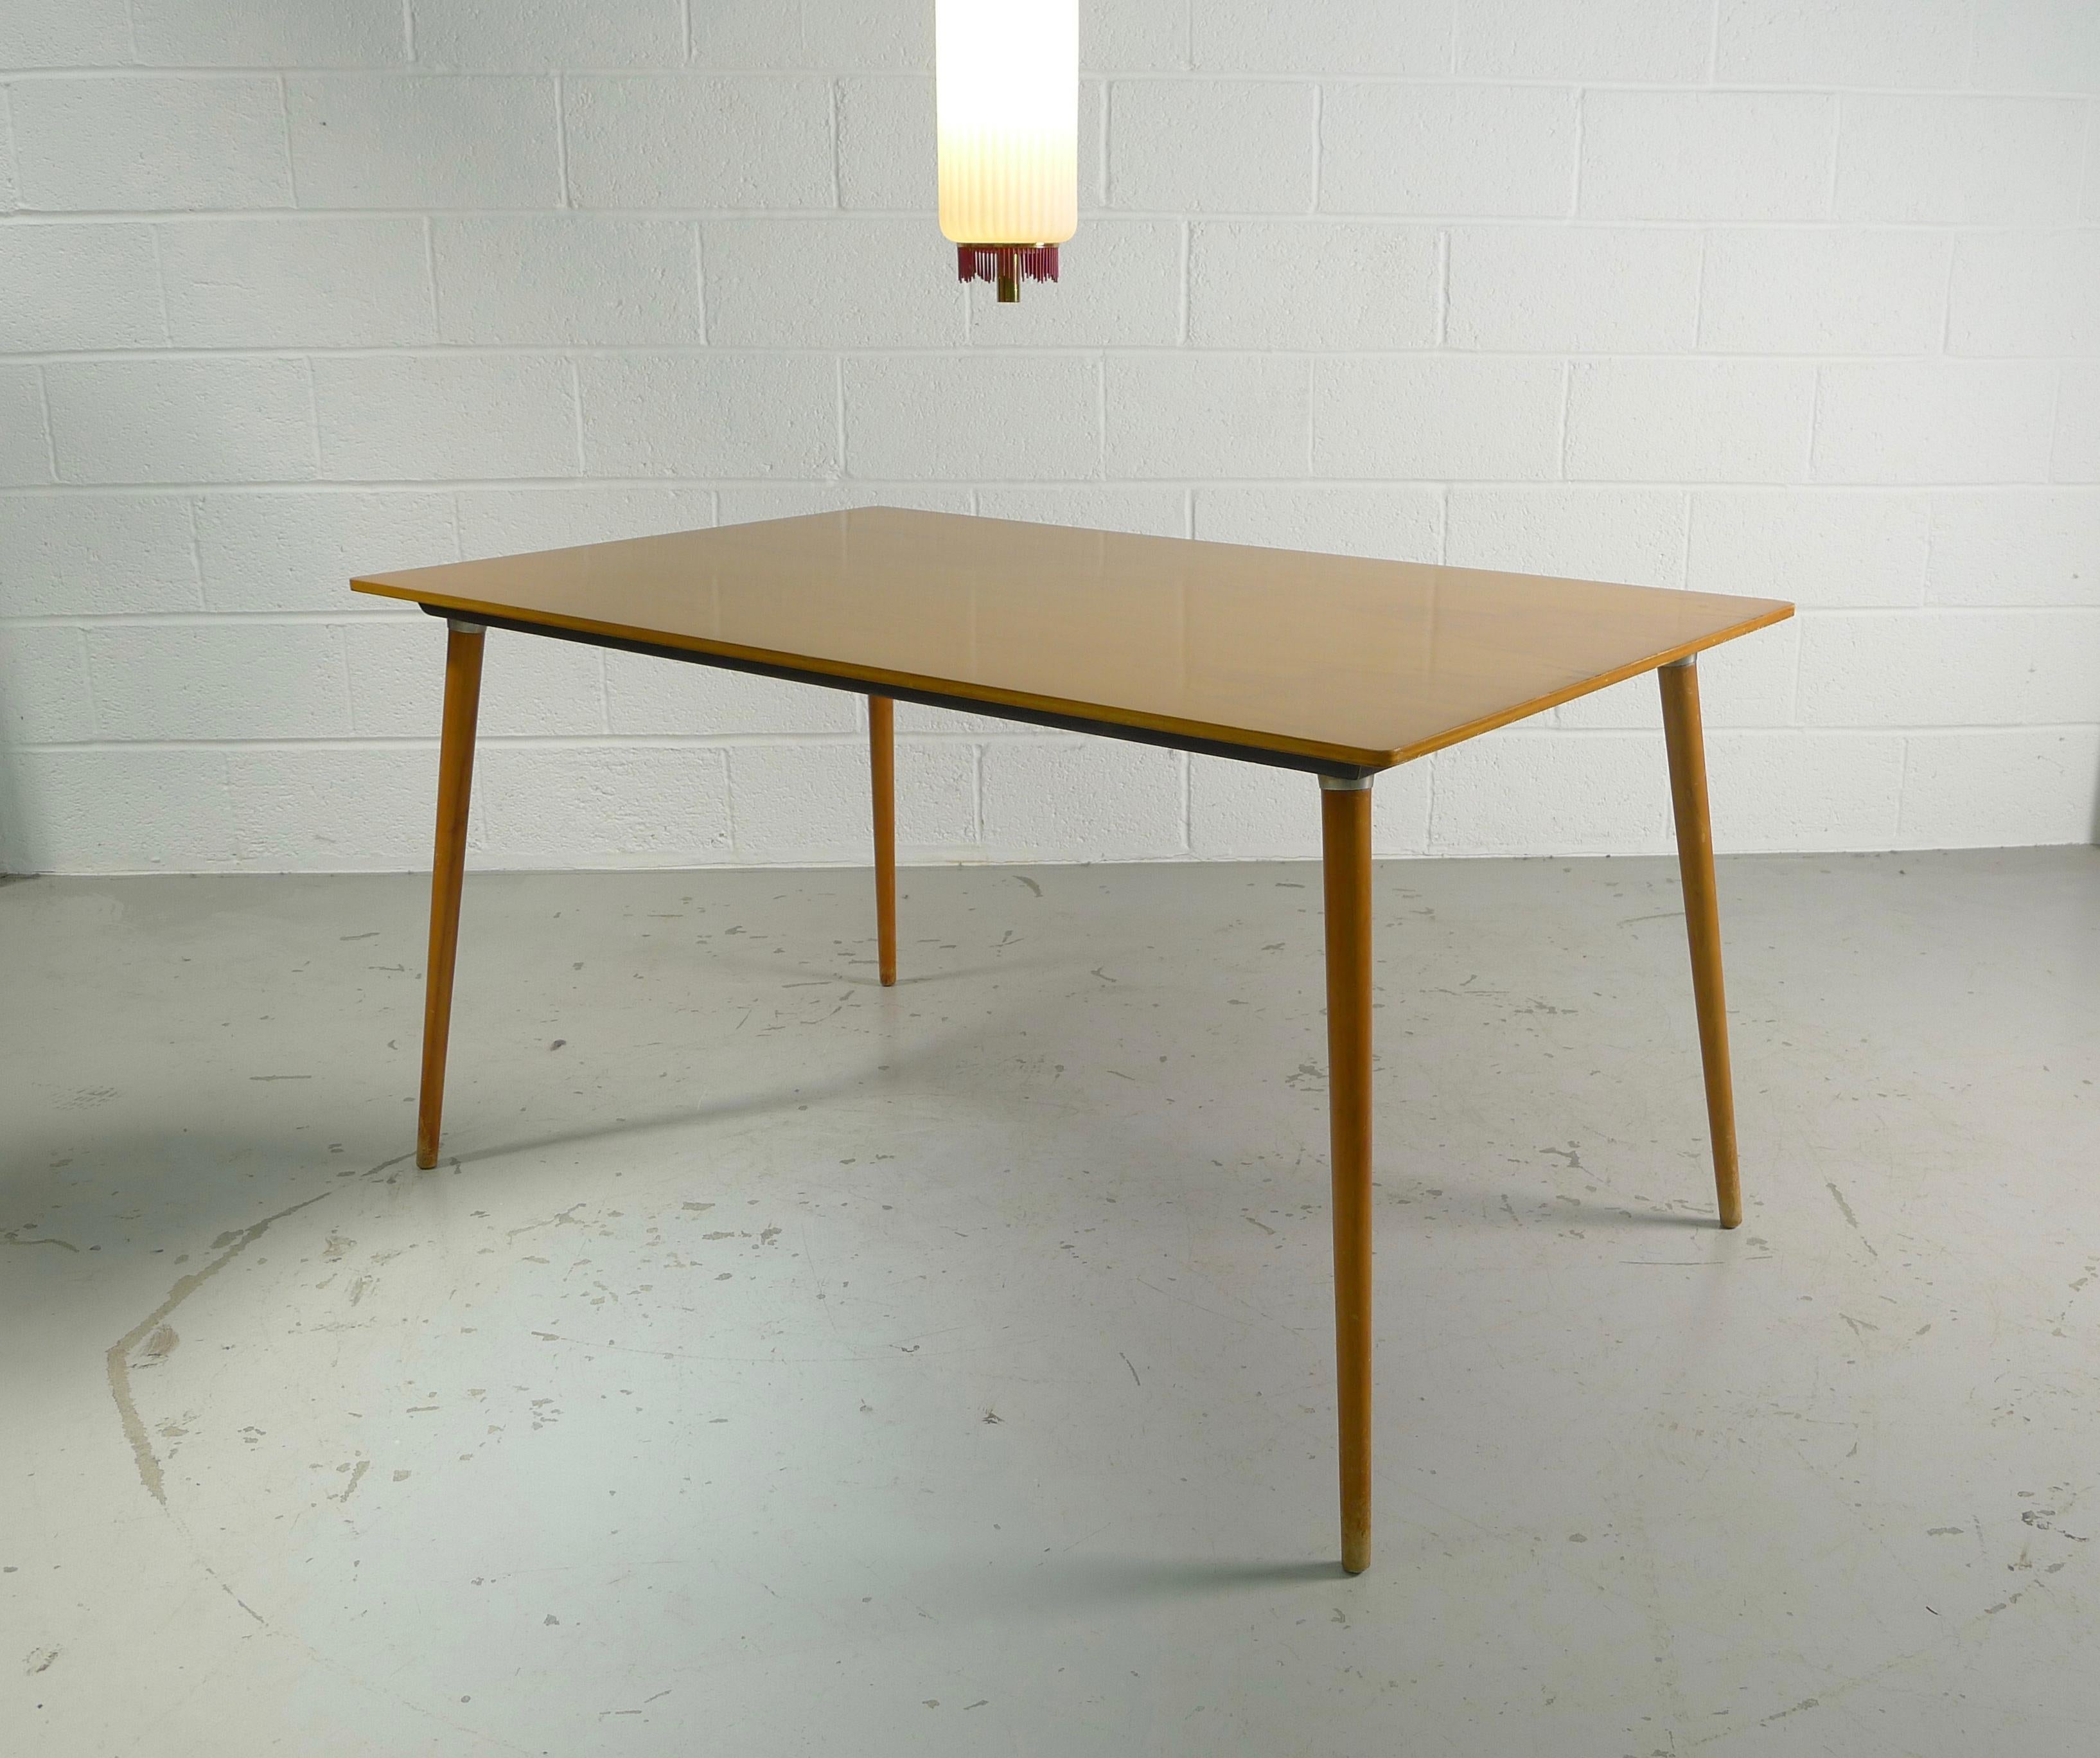 Mid-20th Century Eames DTW-3 Birch Dining Table, circa 1950, Herman Miller Production